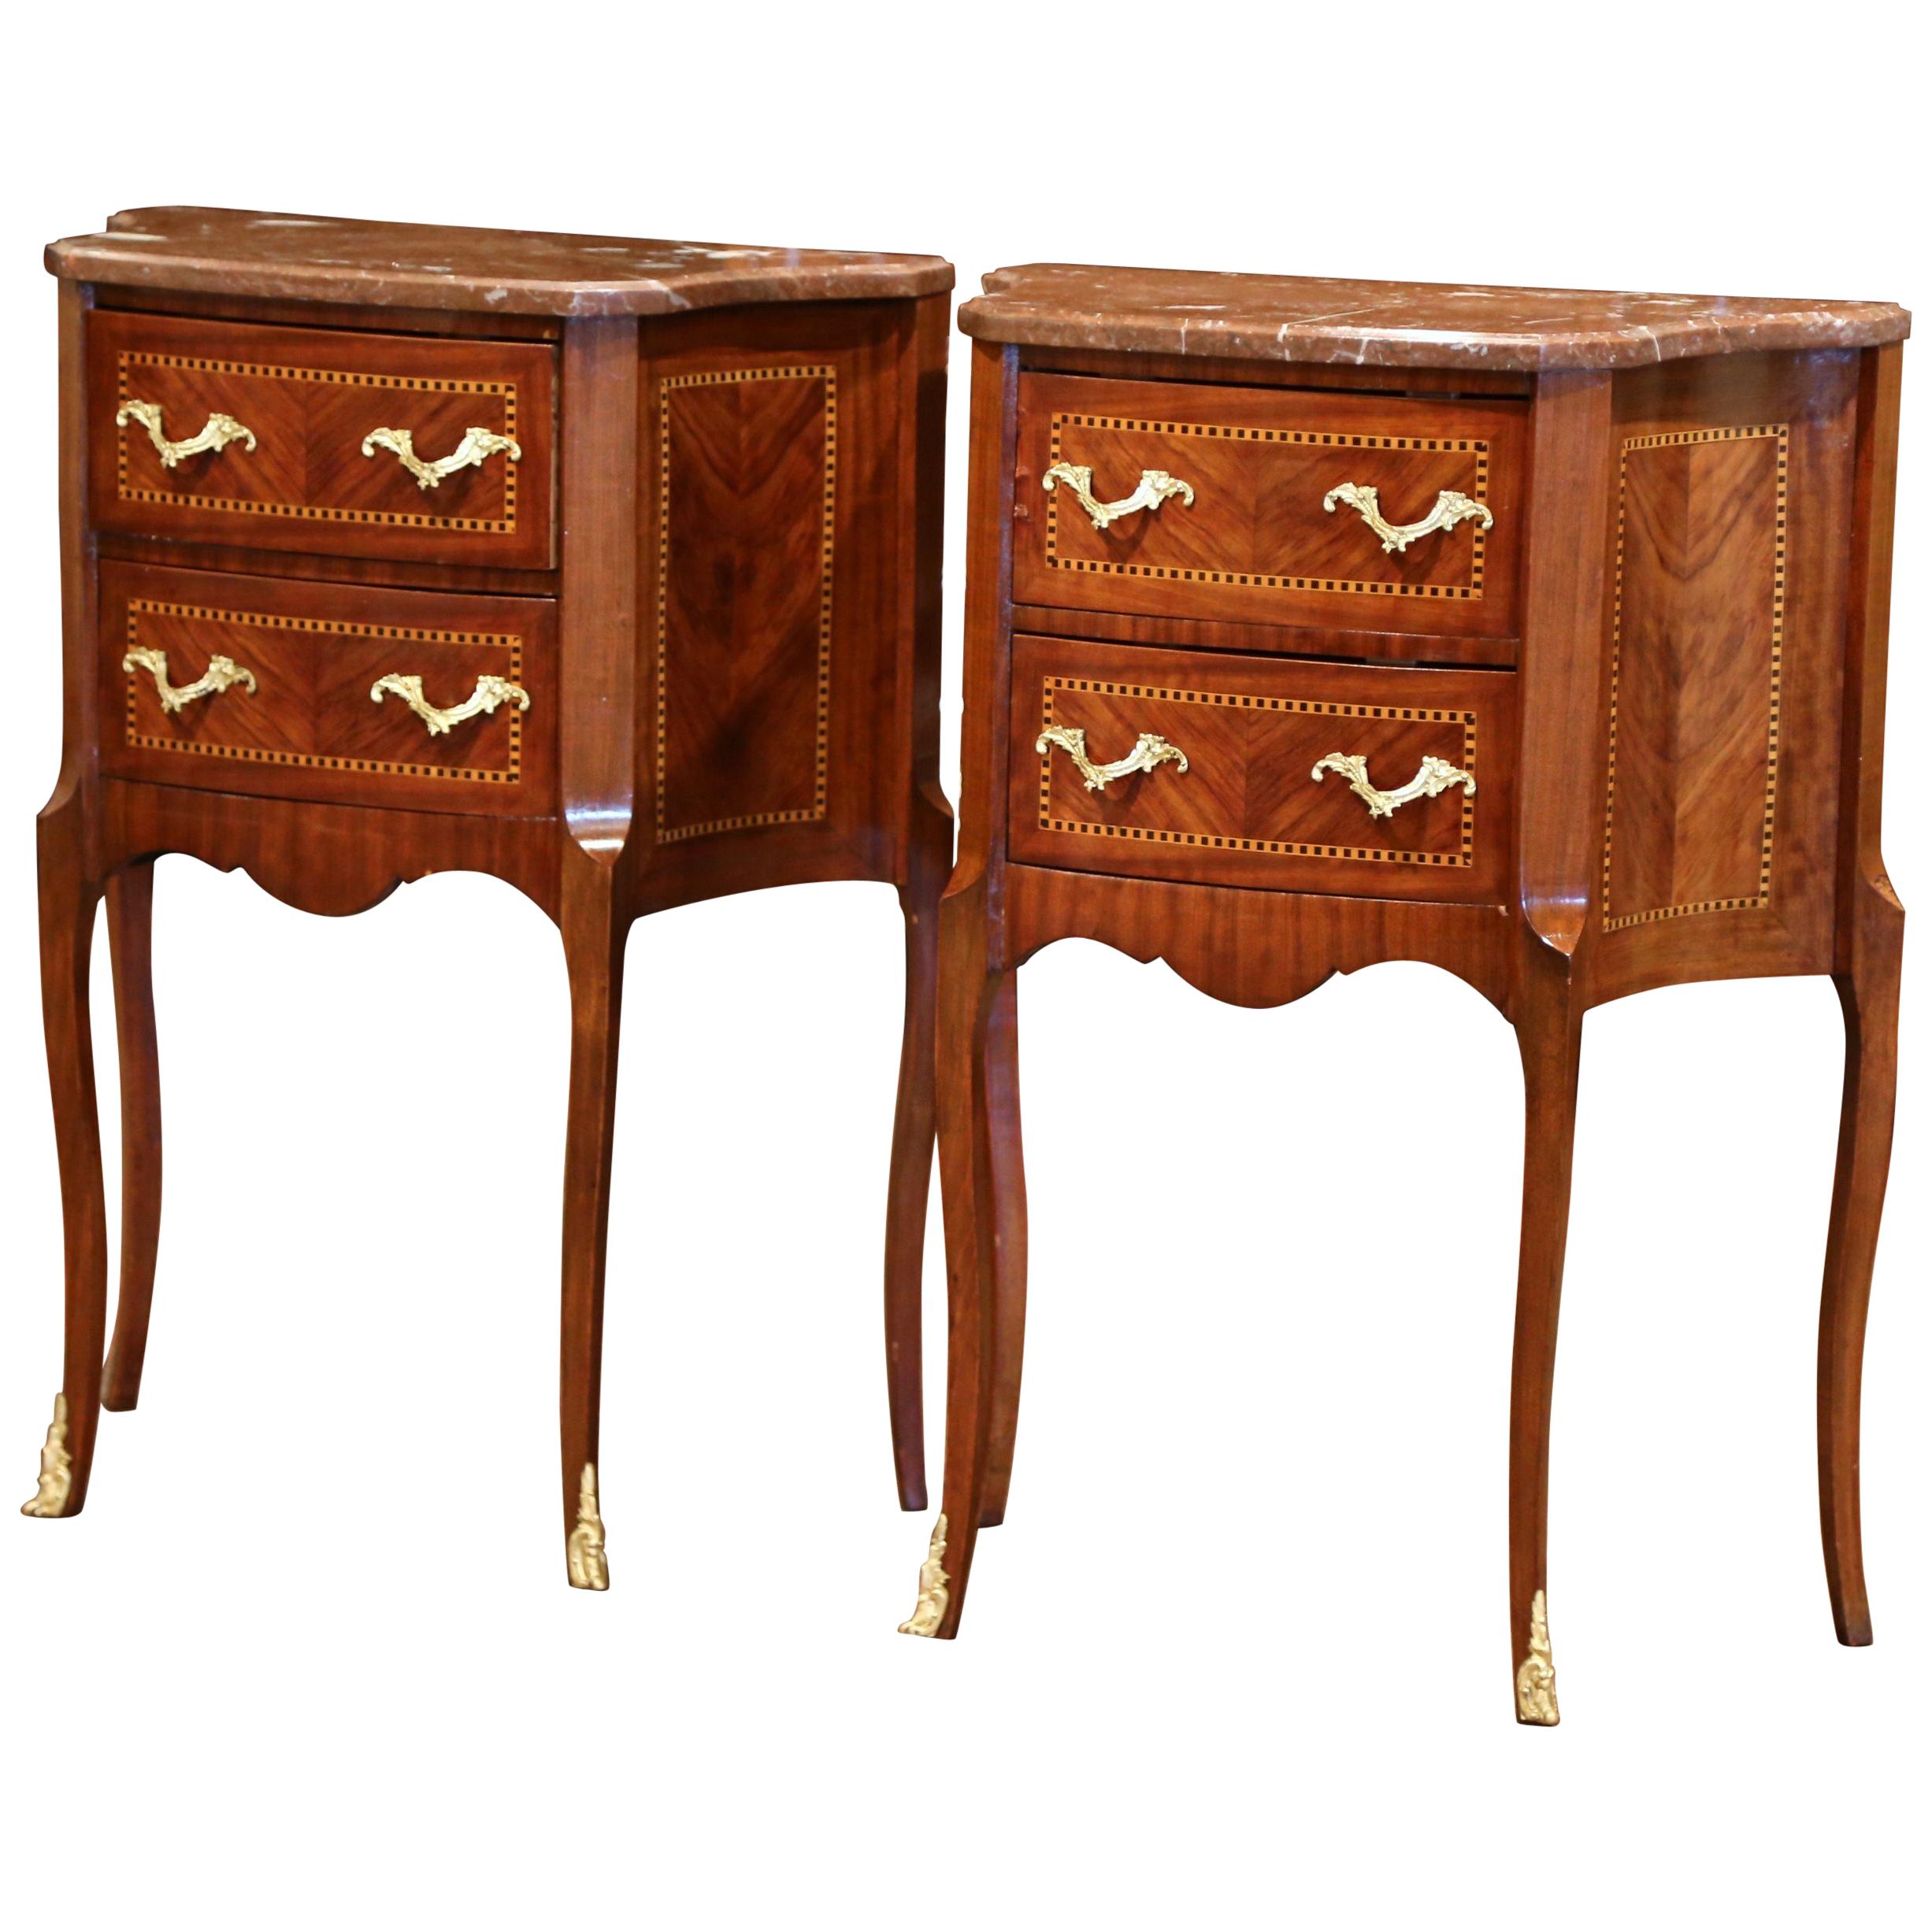 Pair of Vintage French Carved Marquetry Walnut Nightstands with Red Marble Top